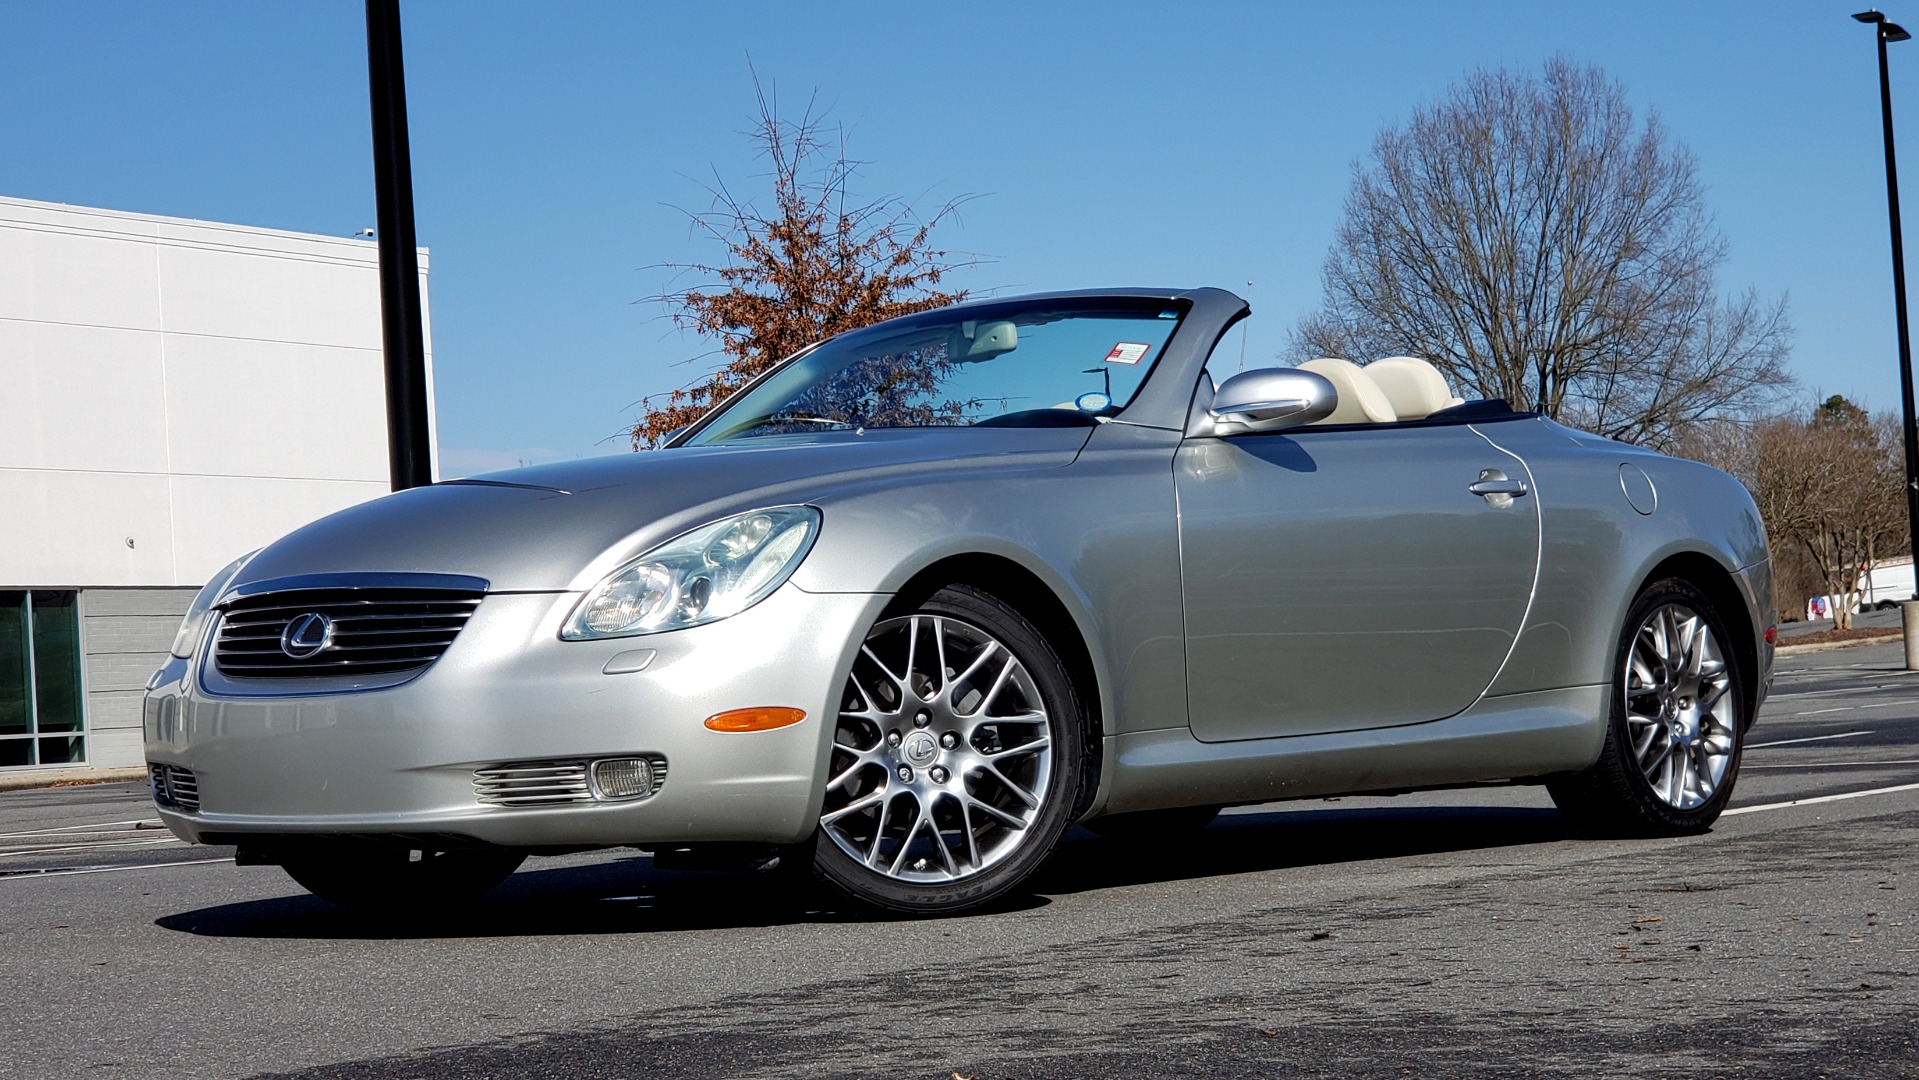 Used 2004 Lexus SC 430 CONVERTIBLE / 4.3L V8 / 5-SPD AUTO / MARK LEVINSON / 18IN WHEELS for sale Sold at Formula Imports in Charlotte NC 28227 1